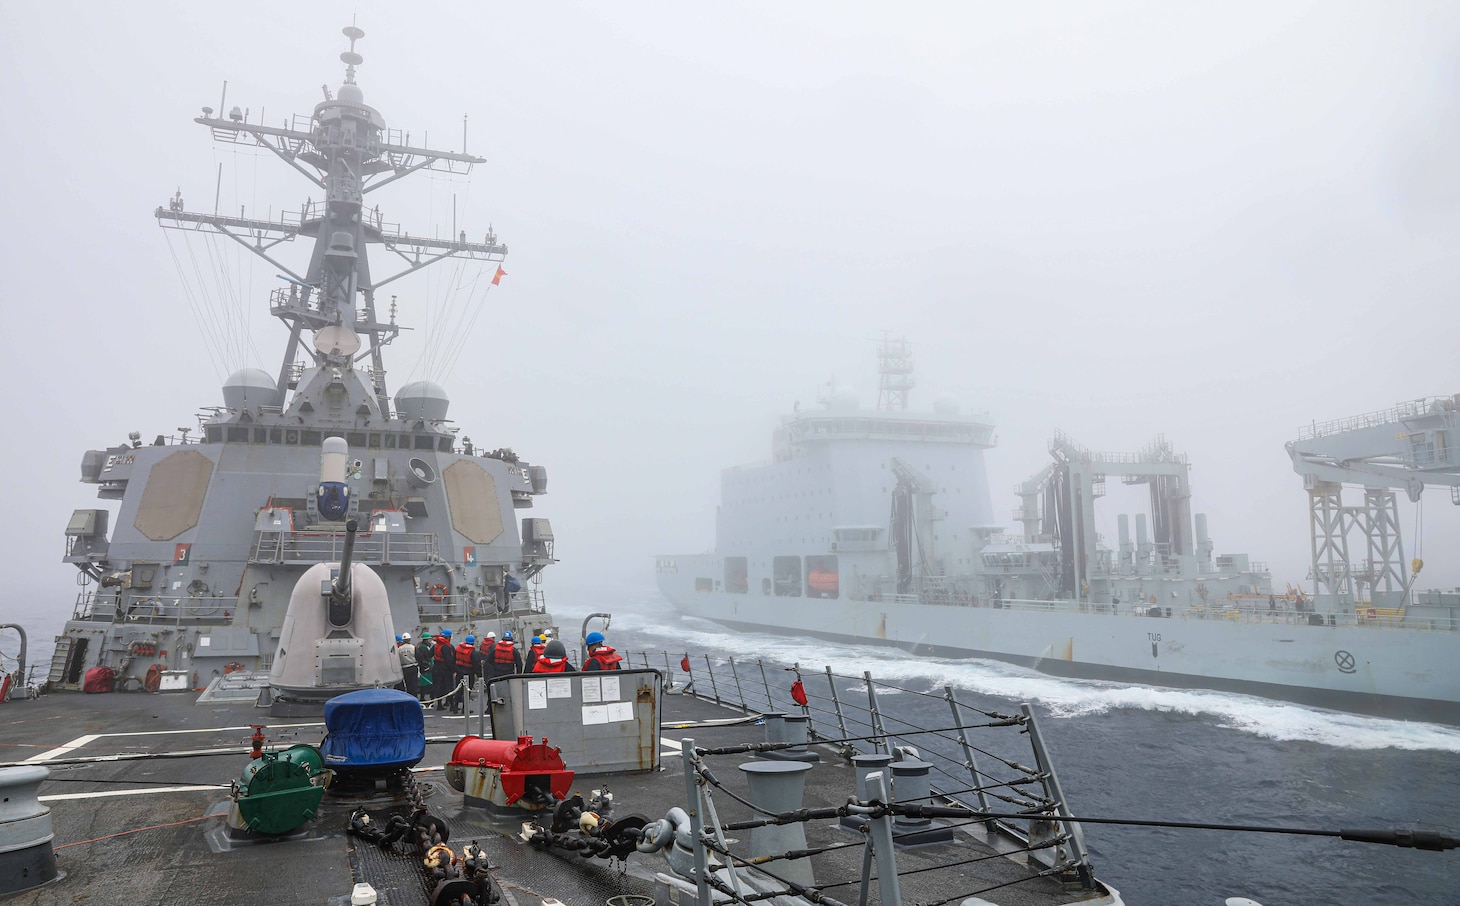 The Arleigh Burke-class guided-missile destroyer USS Benfold (DDG 65) and the Royal Canadian Navy replenishment ship MV Asterix conduct a replenishment-at-sea in the North Pacific Ocean on Aug. 25.